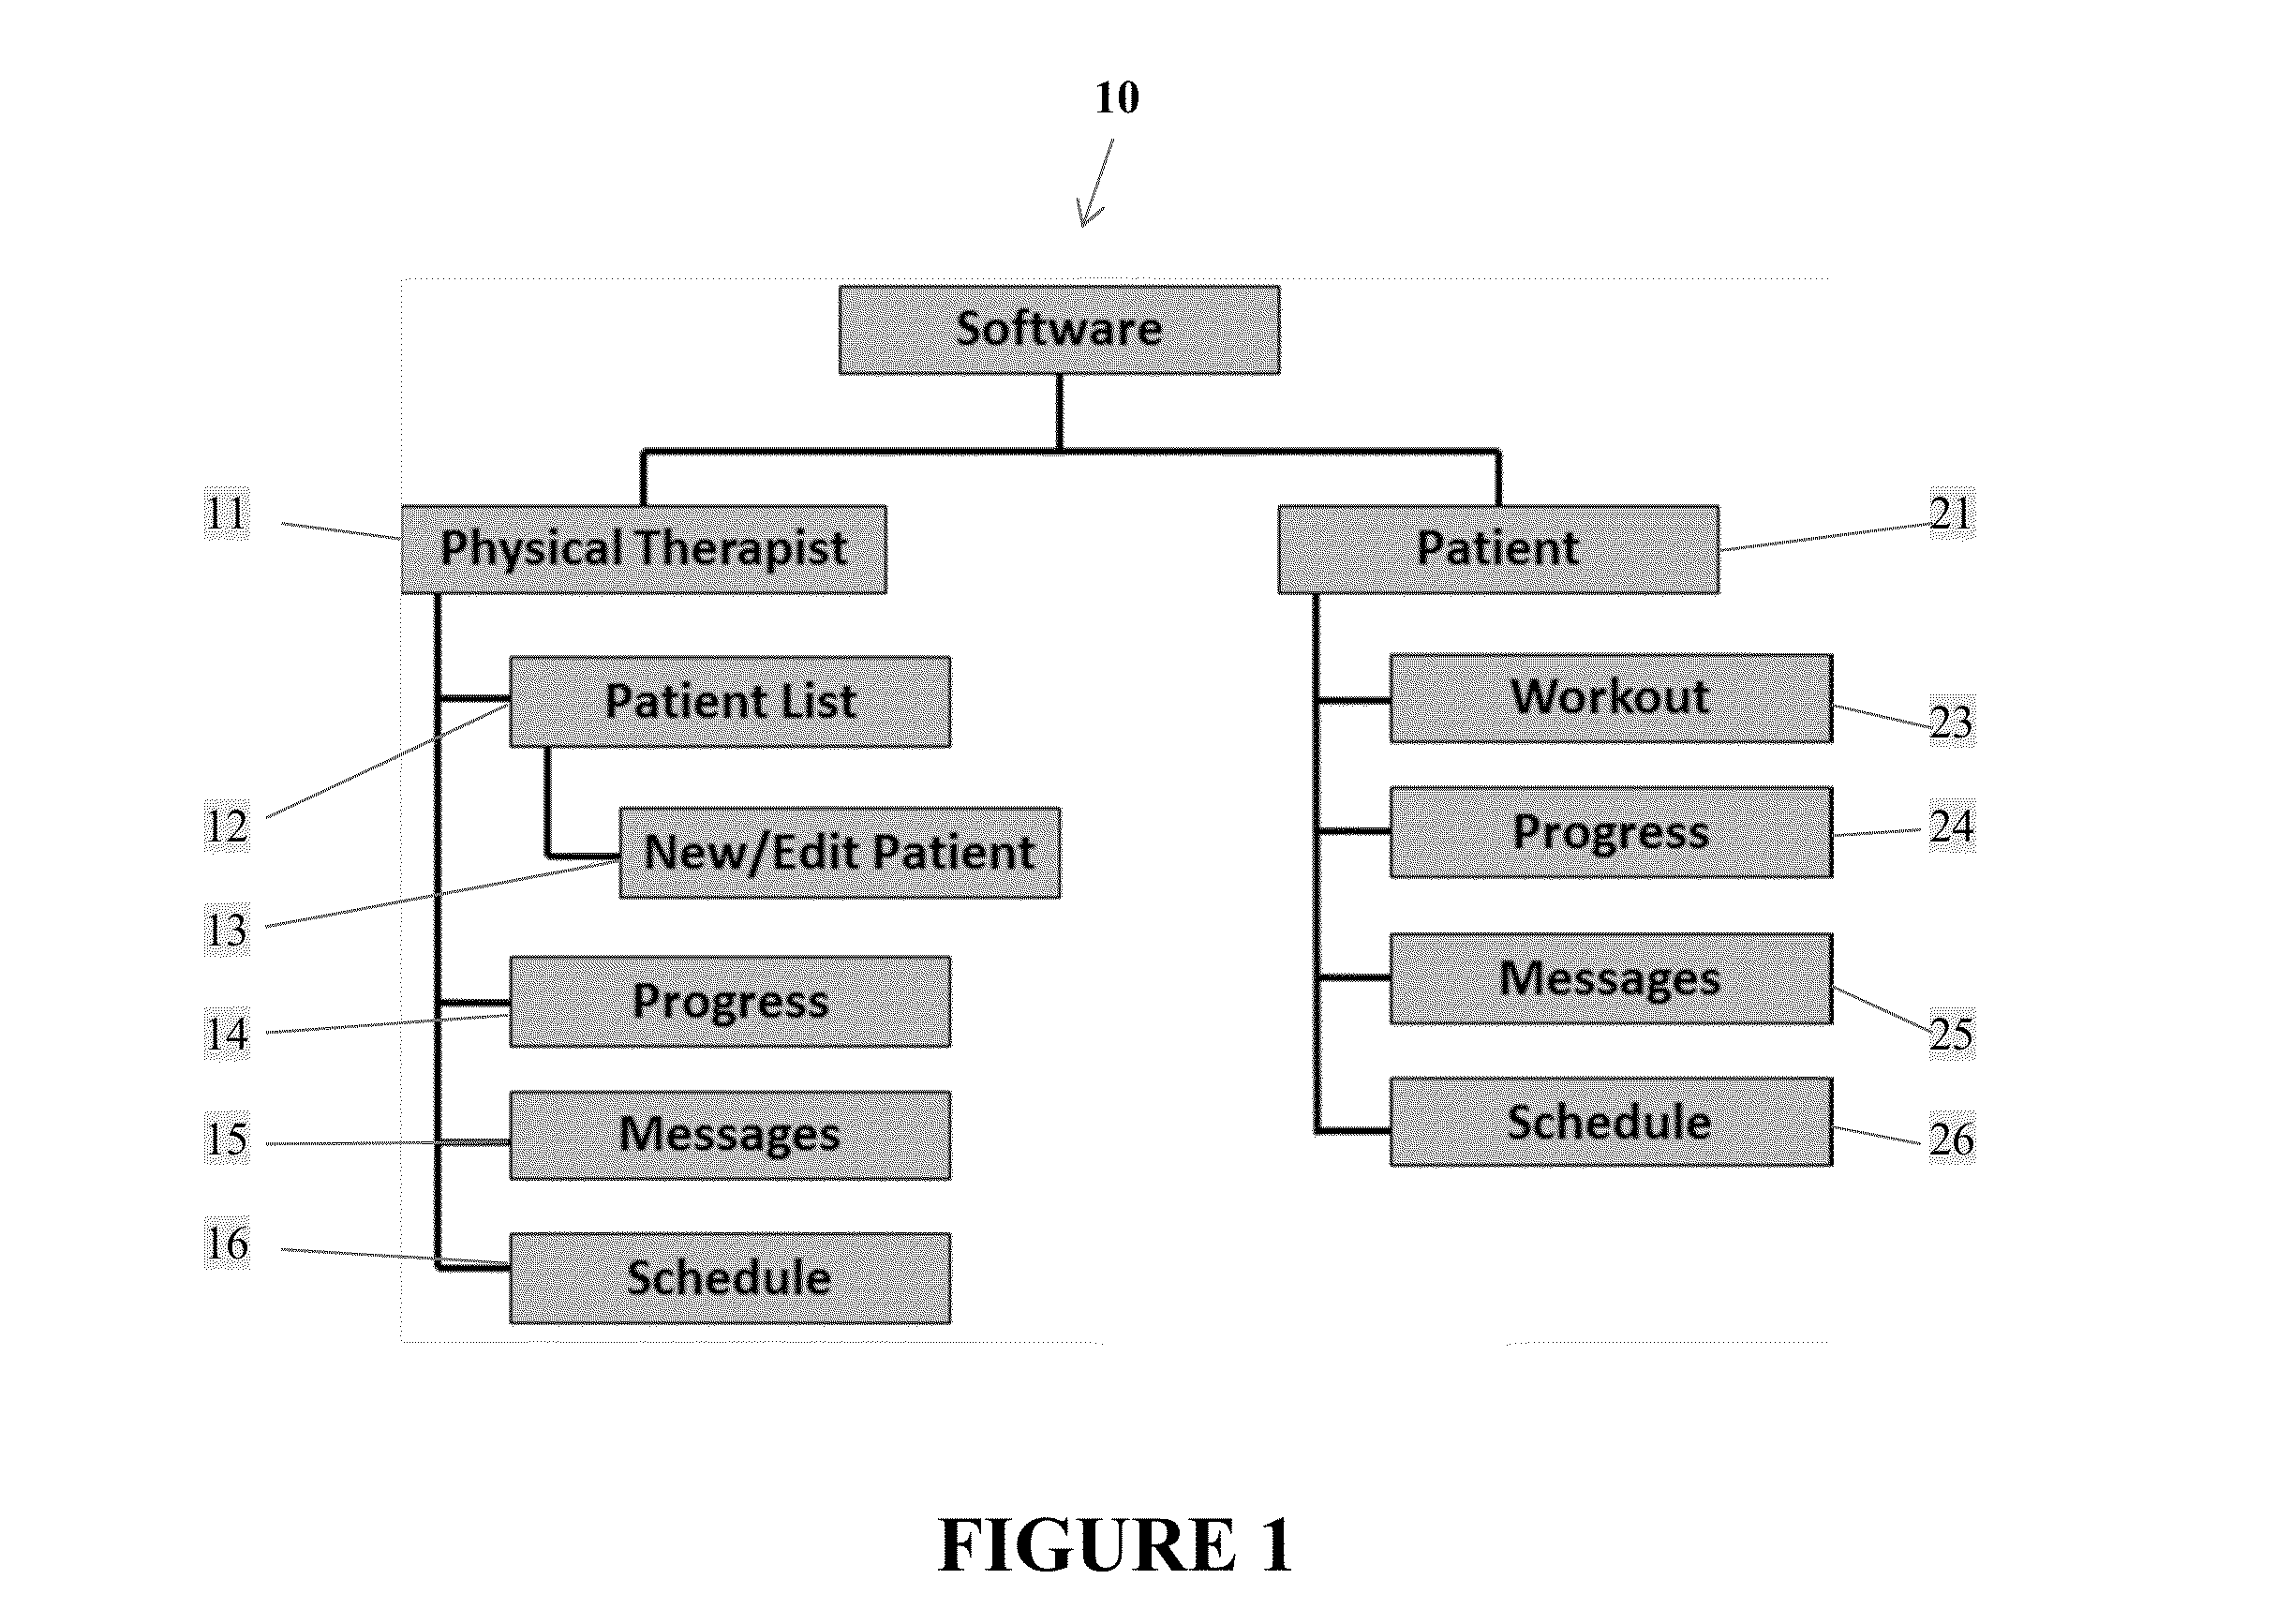 Method and system for physical therapy using three-dimensional sensing equipment